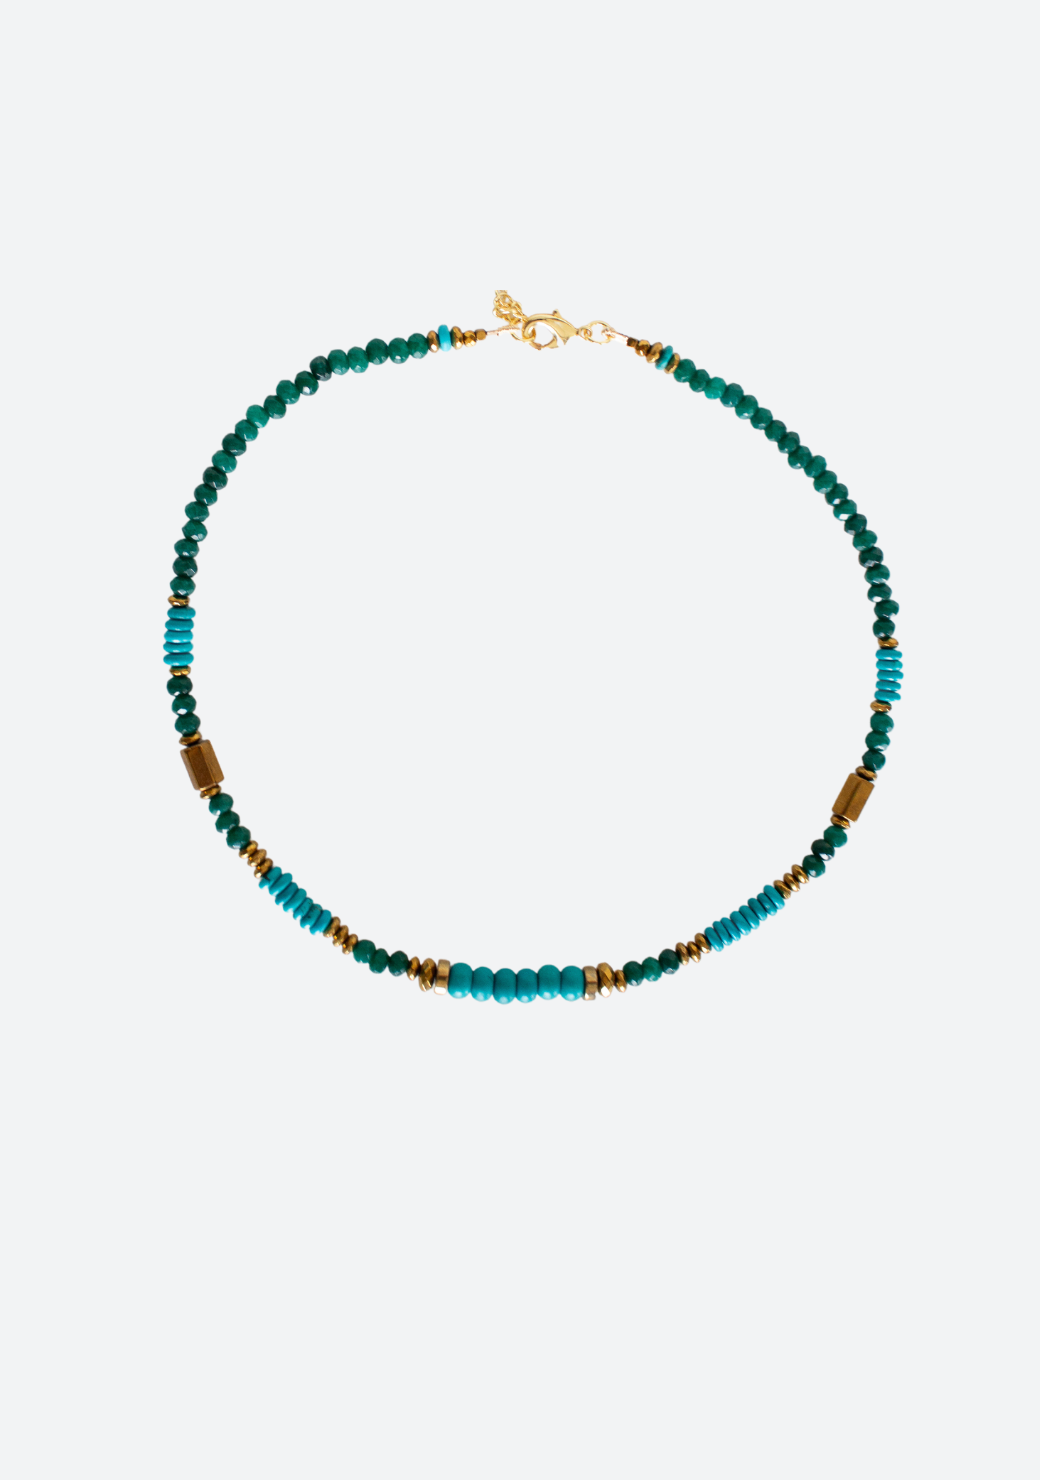 Rondelle Necklace in Green and Turquoise